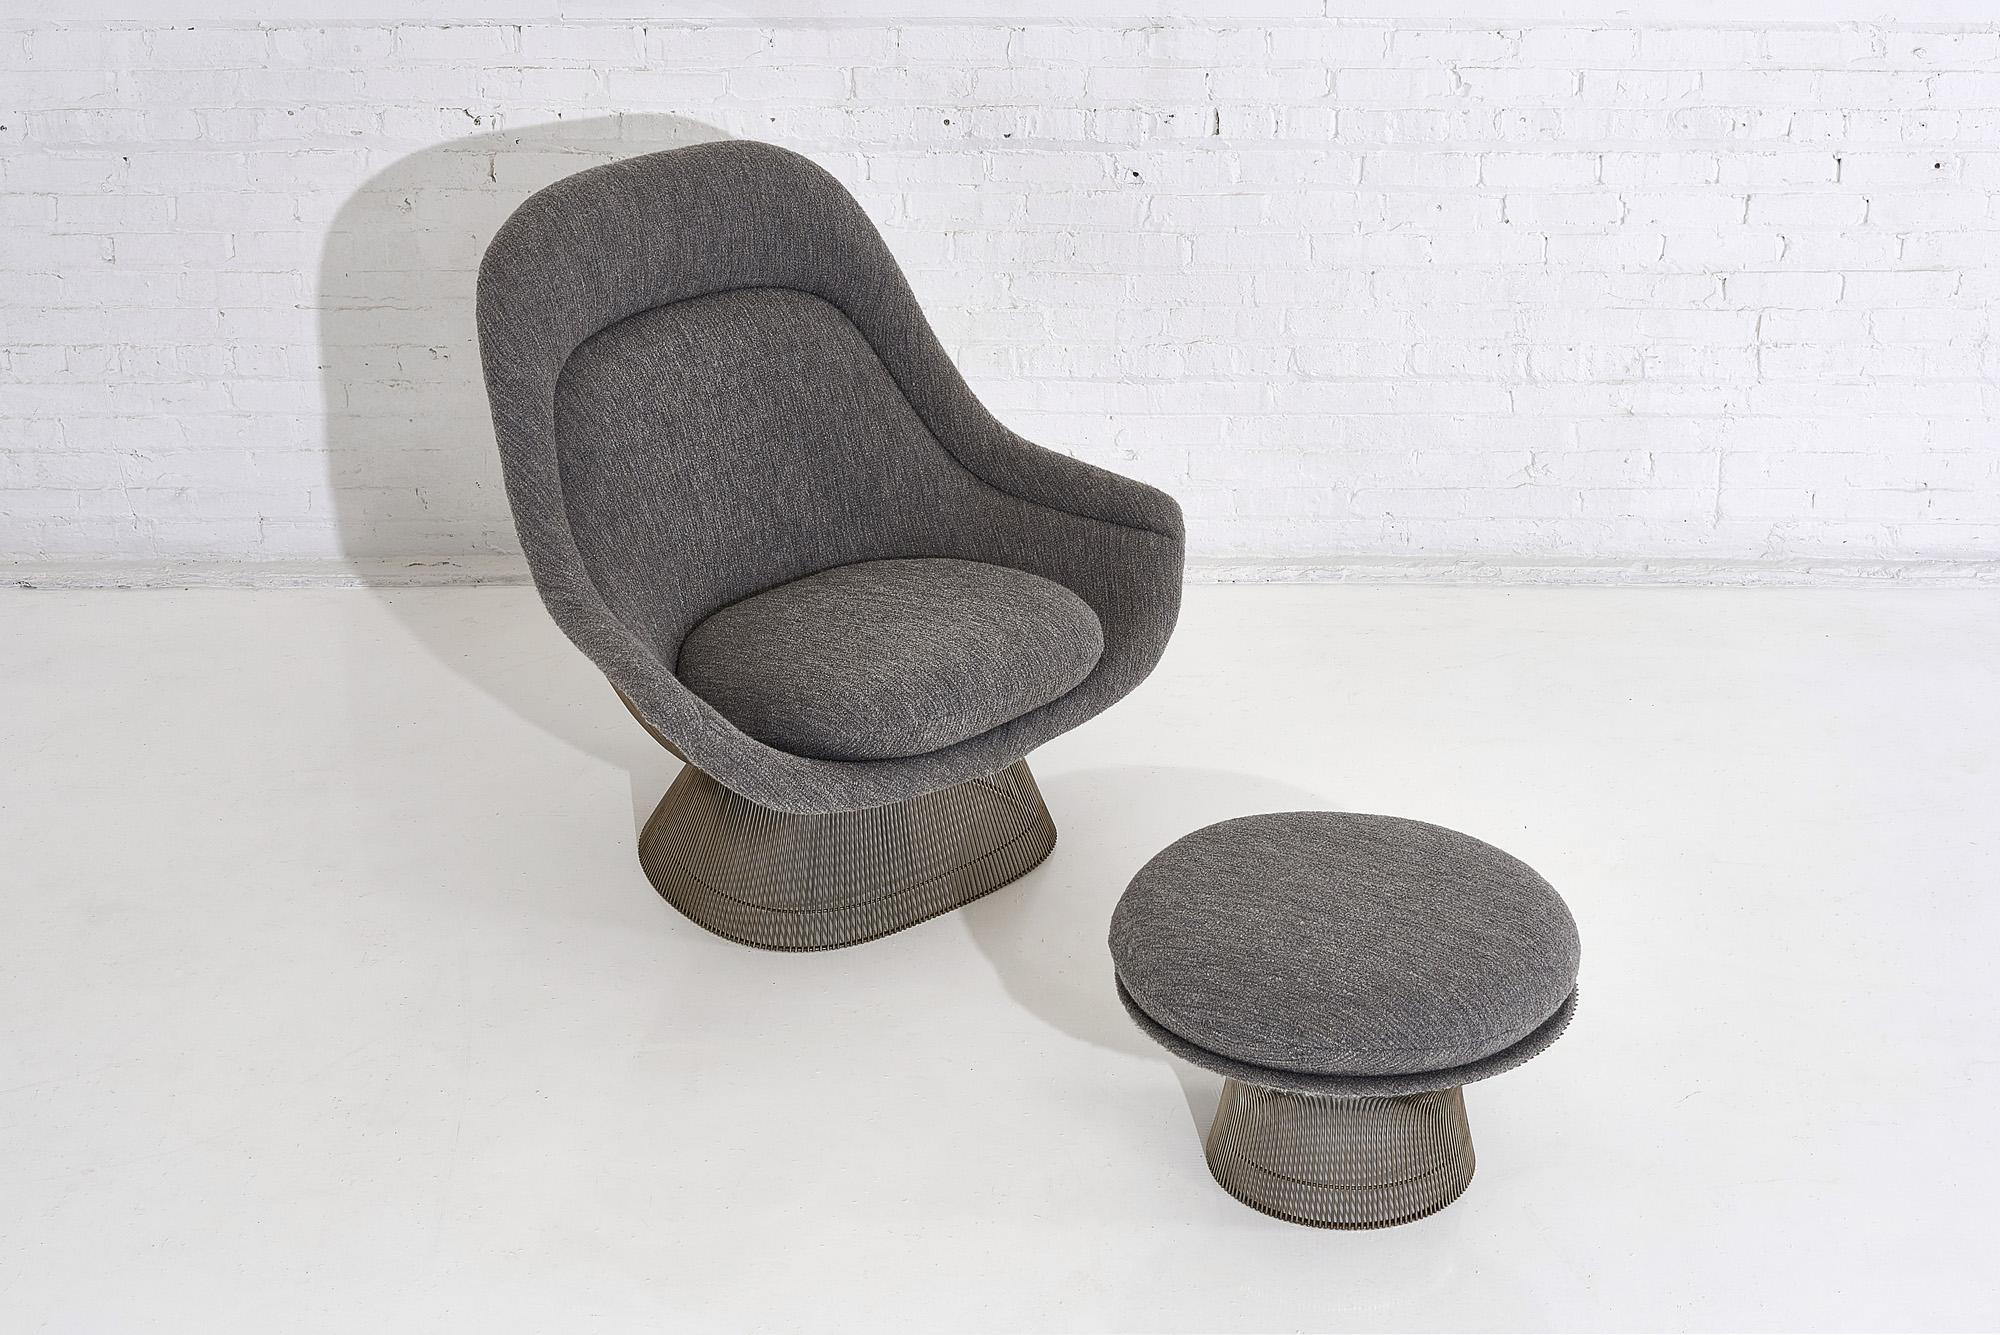 Warren Platner for Knoll lounge chair with ottoman. Reupholstered in gray boucle.